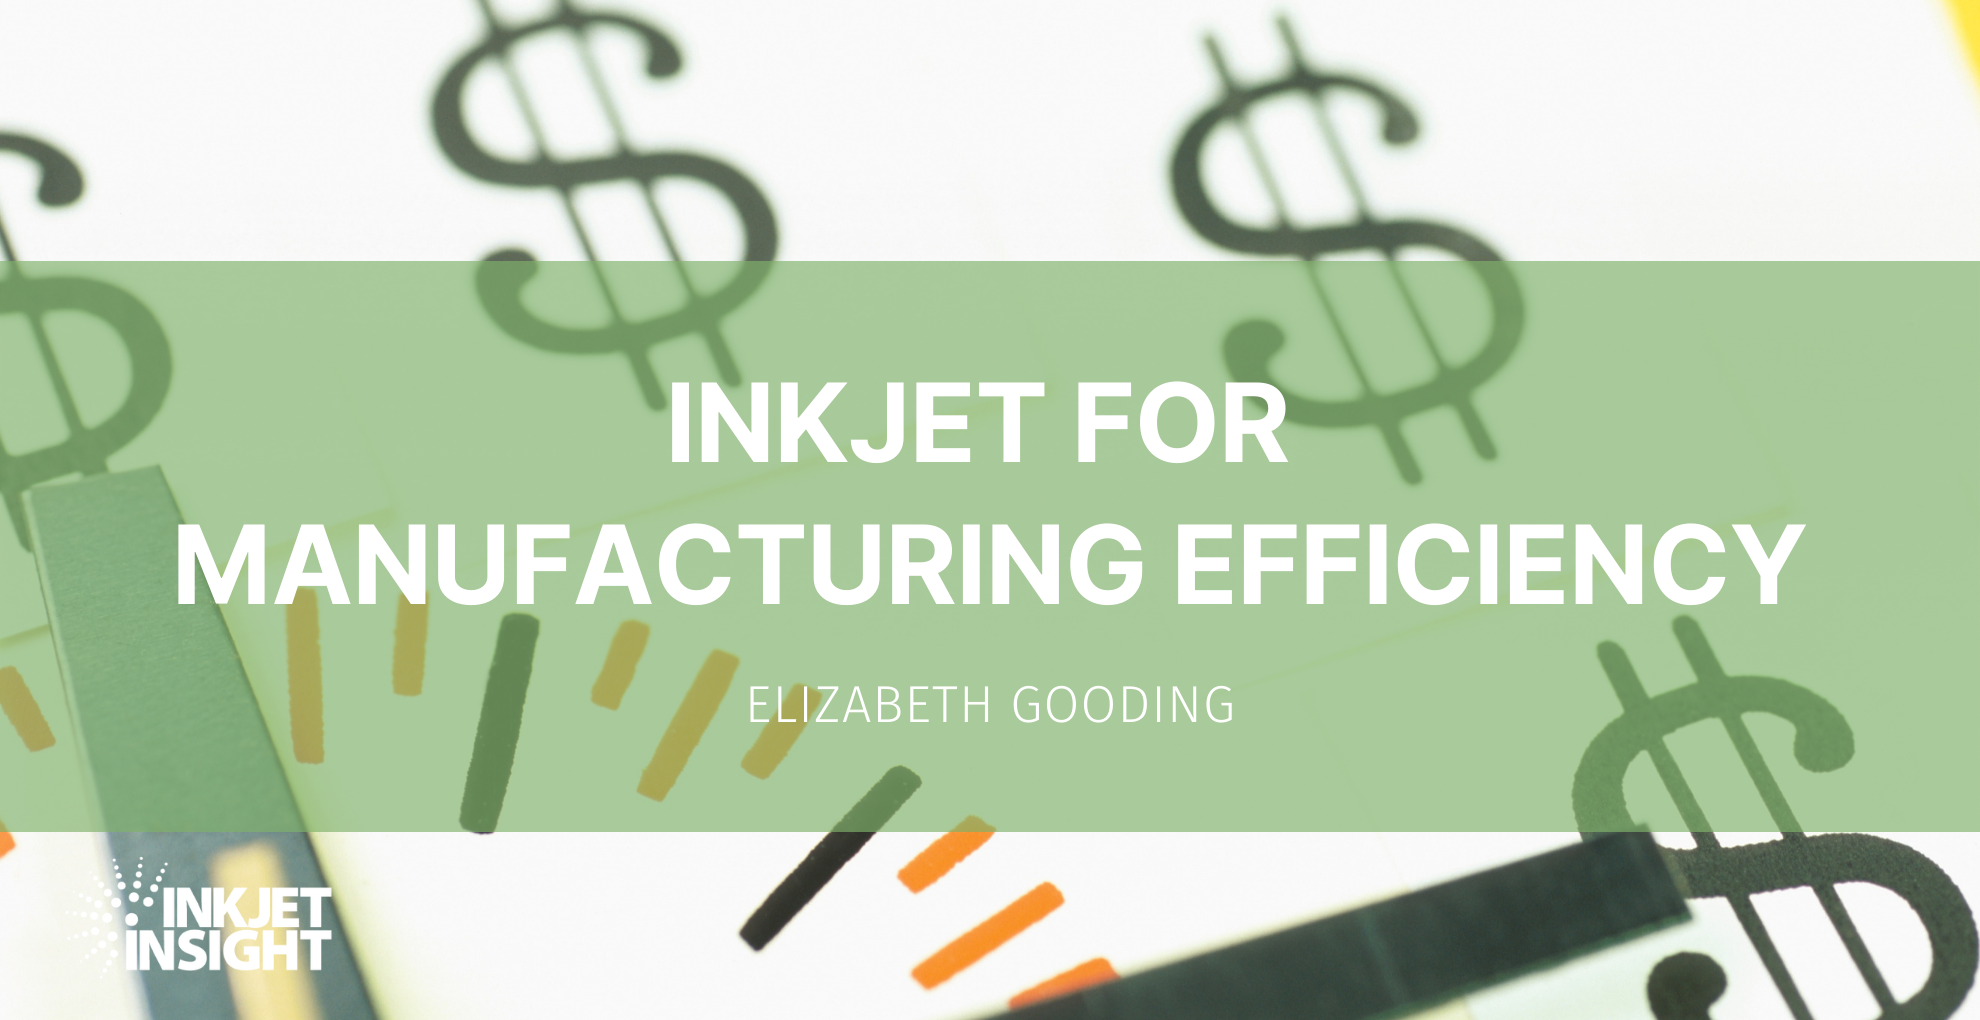 Featured image for “Inkjet for Manufacturing Efficiency”